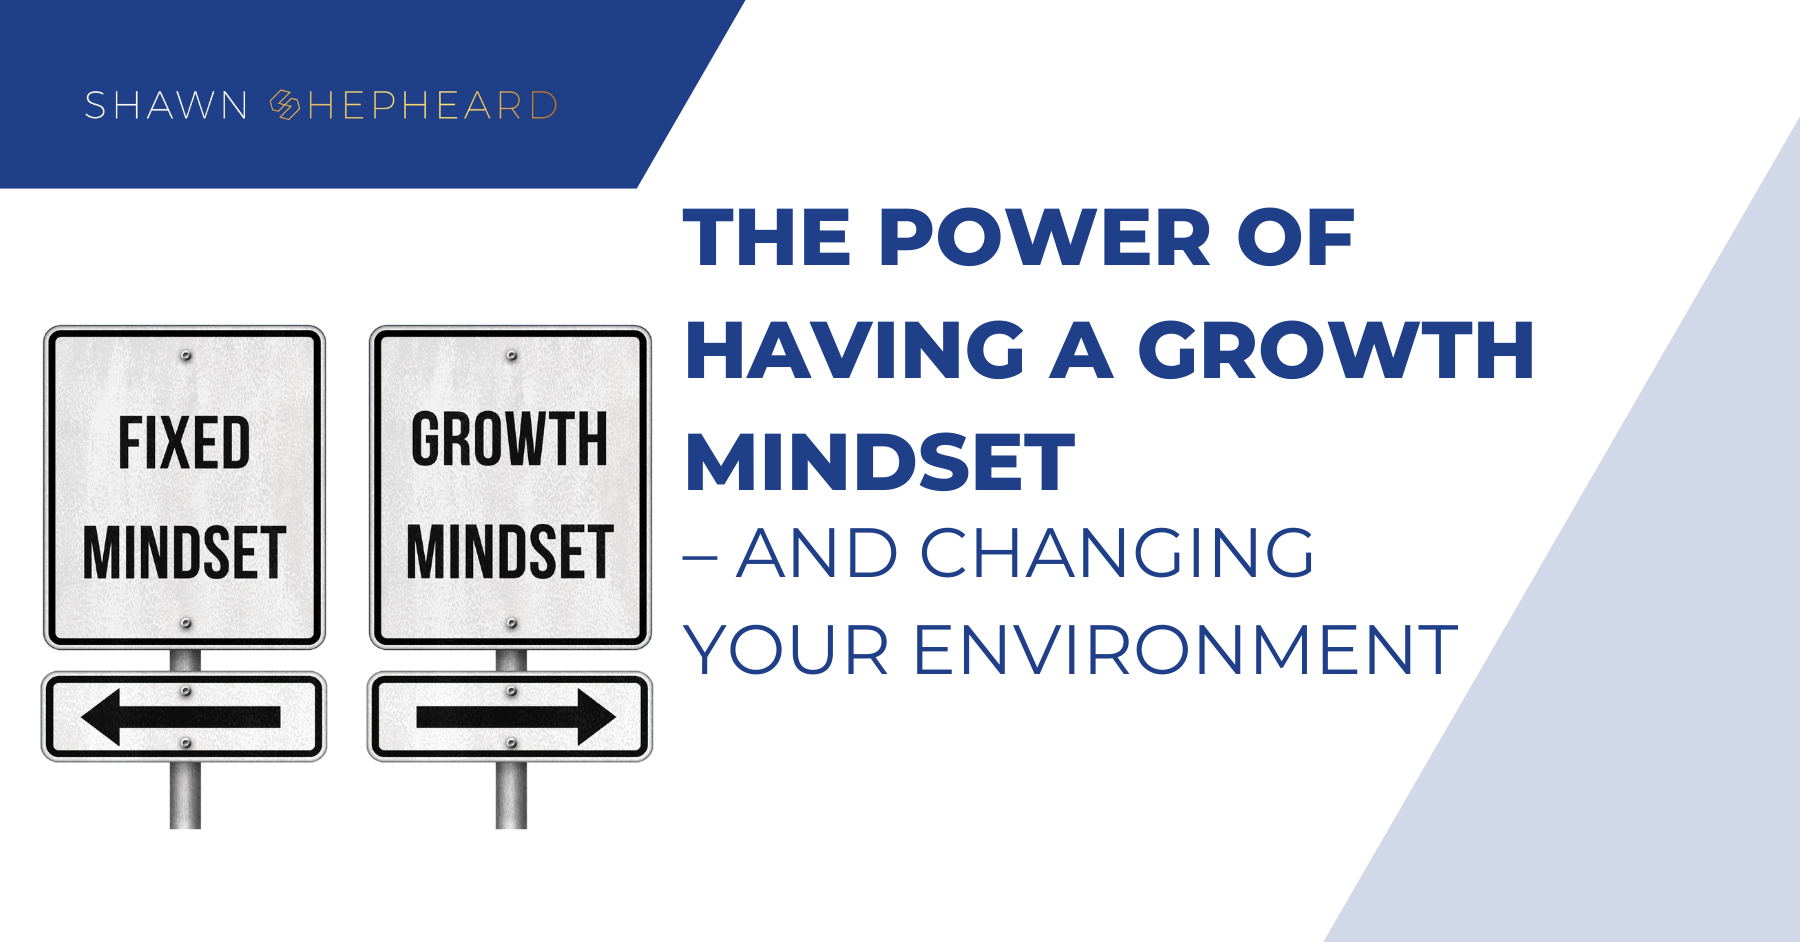 The power of having a growth mindset – and changing your environment